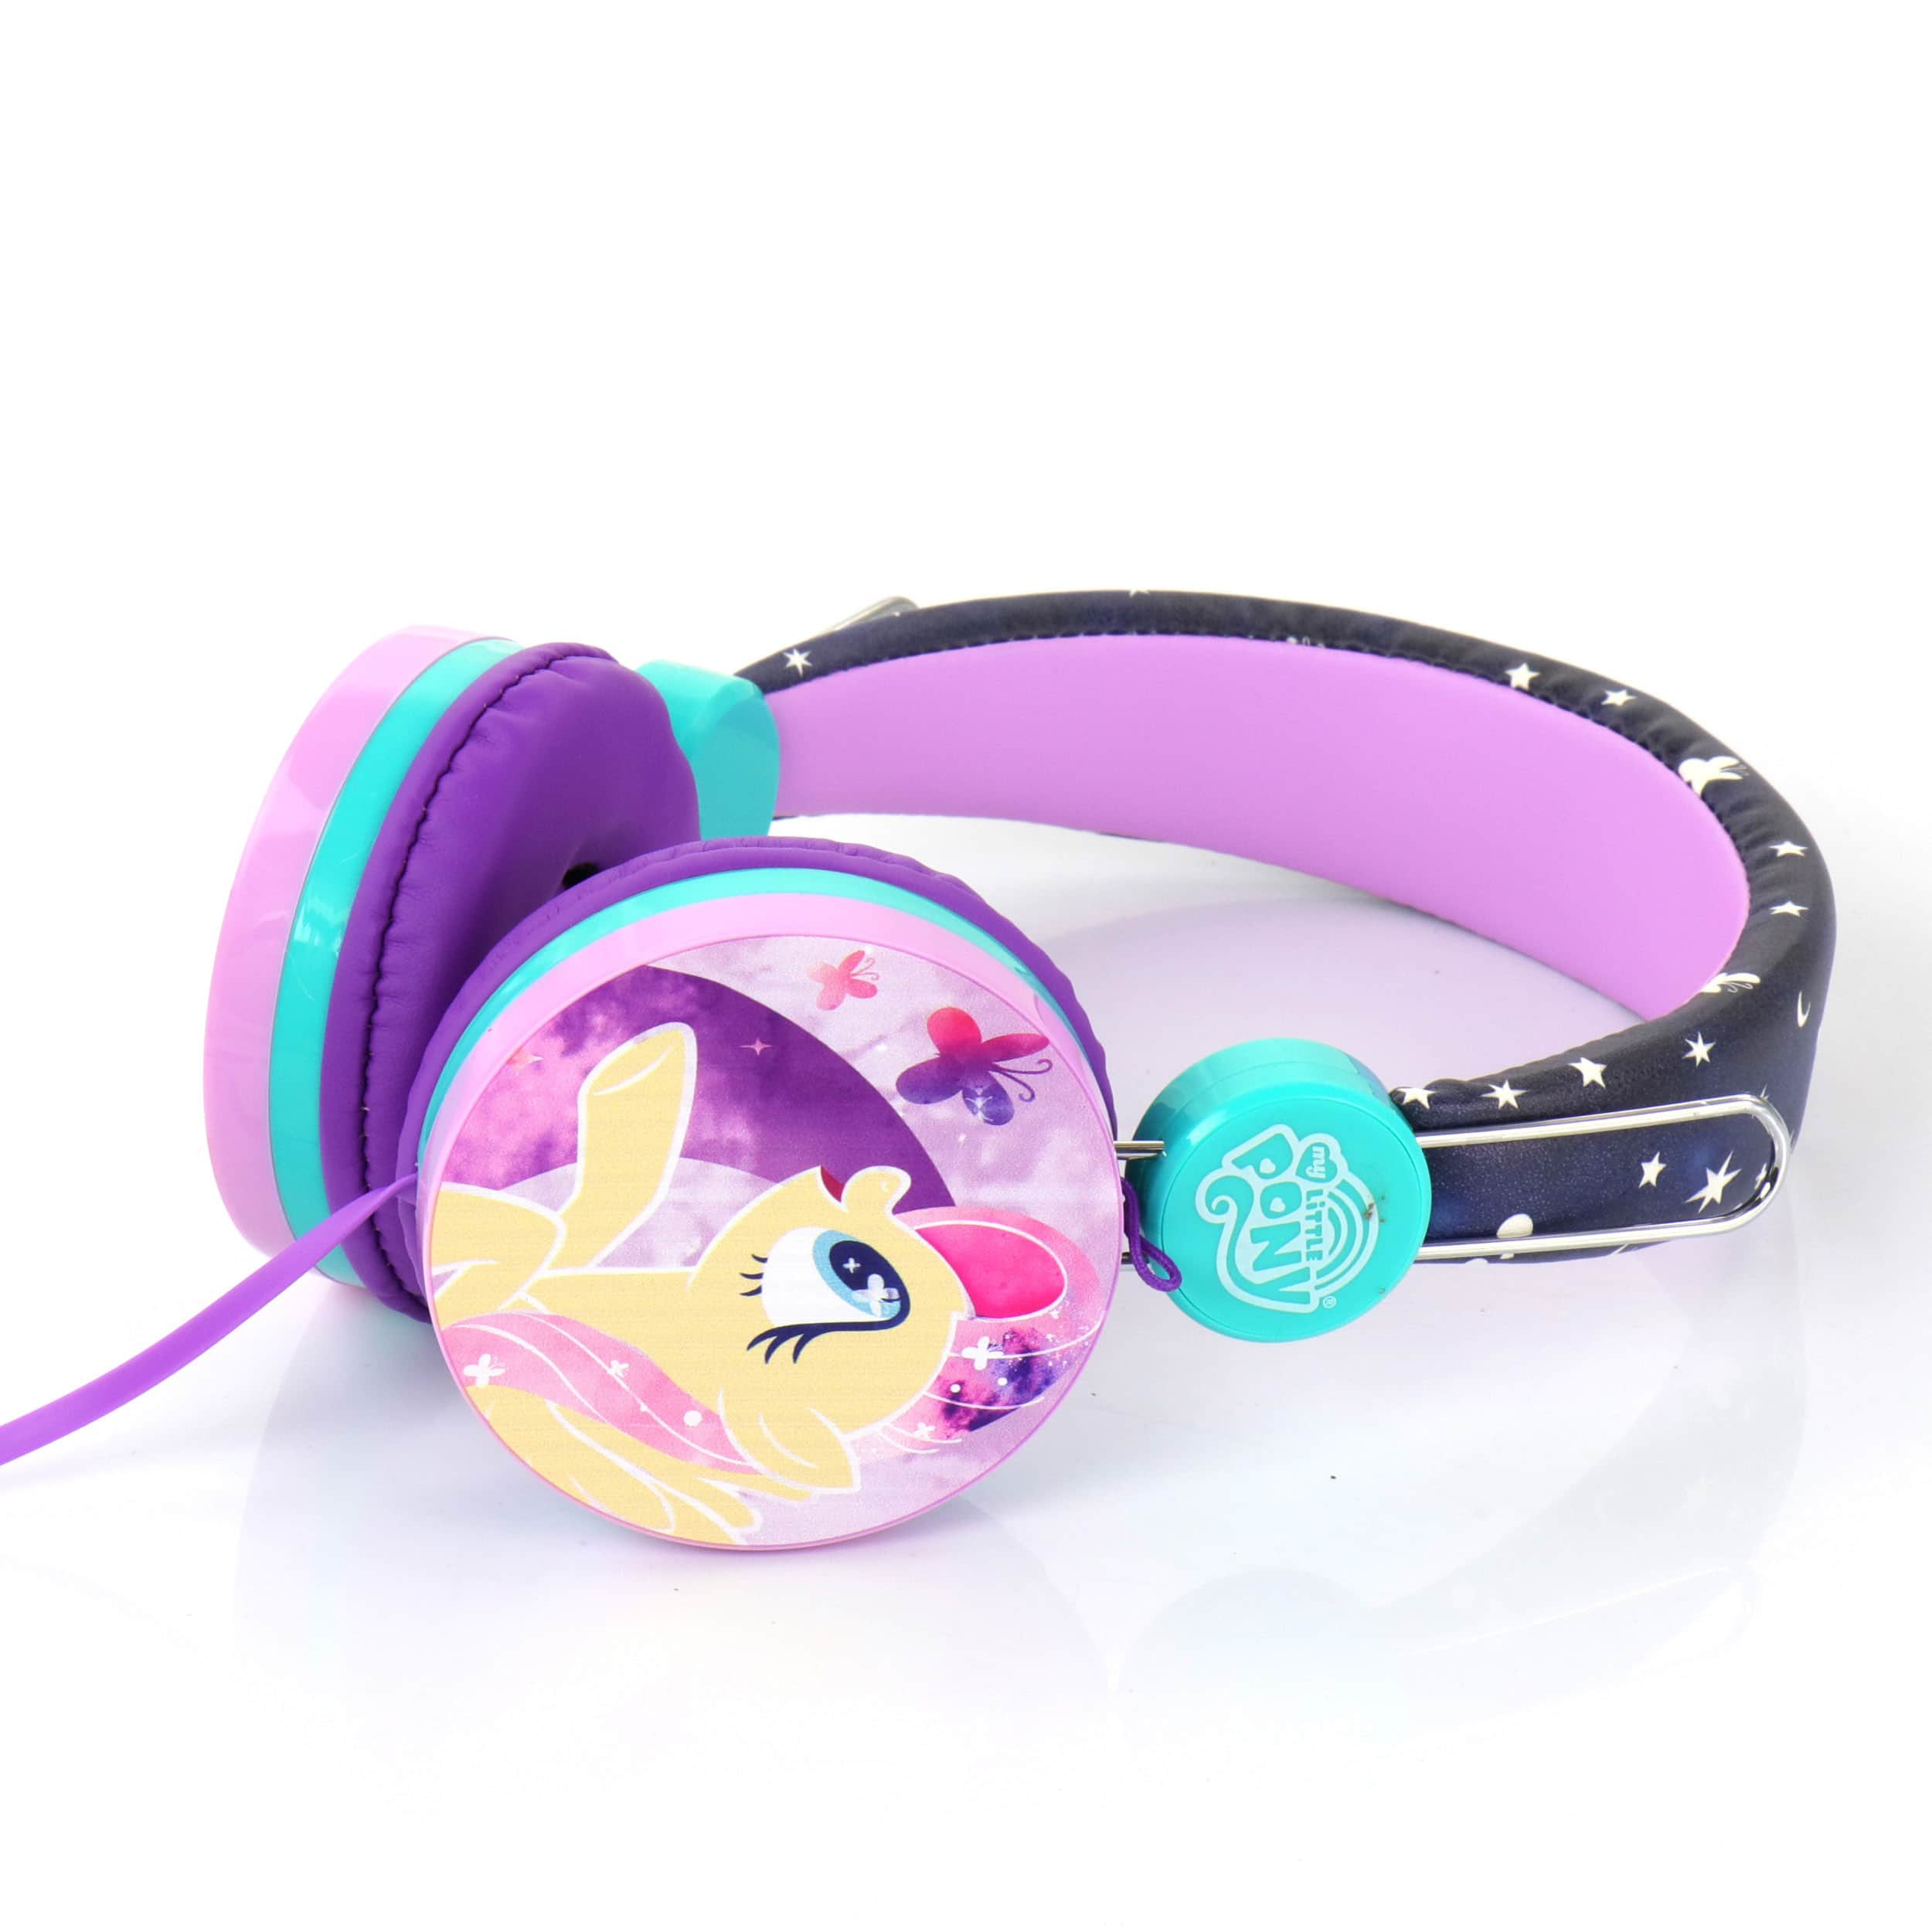 My Little Pony High Quality Wired Headphones with Glitter